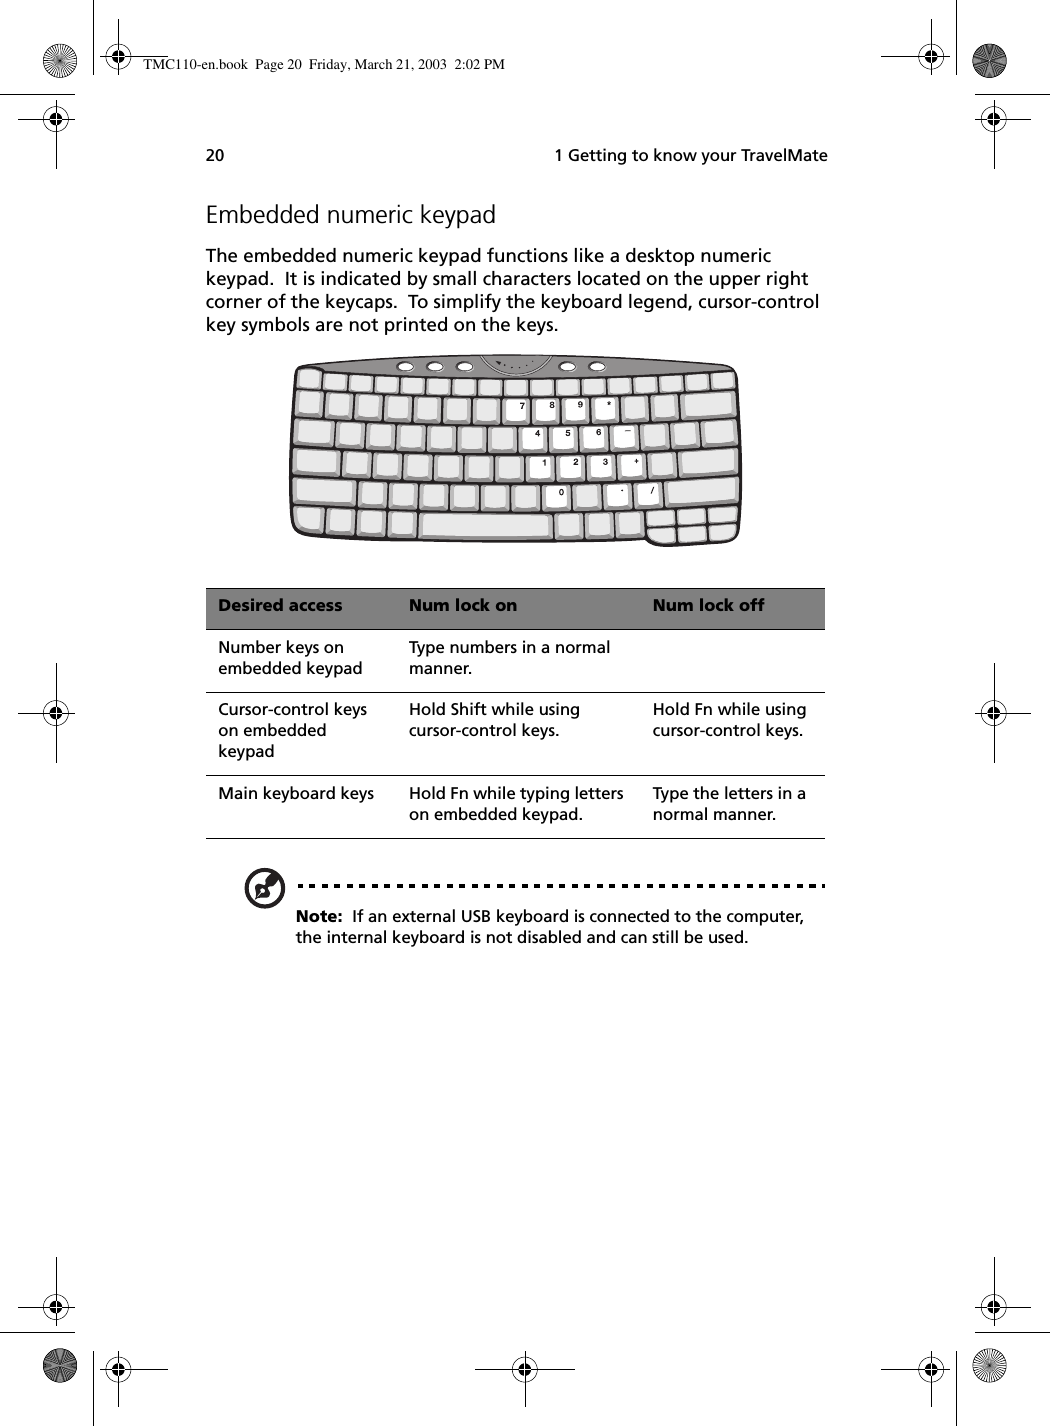  1 Getting to know your TravelMate20Embedded numeric keypadThe embedded numeric keypad functions like a desktop numeric keypad.  It is indicated by small characters located on the upper right corner of the keycaps.  To simplify the keyboard legend, cursor-control key symbols are not printed on the keys.   Note:  If an external USB keyboard is connected to the computer, the internal keyboard is not disabled and can still be used.Desired access Num lock on Num lock offNumber keys on embedded keypadType numbers in a normal manner.Cursor-control keys on embedded keypadHold Shift while using cursor-control keys.Hold Fn while using cursor-control keys.Main keyboard keys Hold Fn while typing letters on embedded keypad.Type the letters in a normal manner.TMC110-en.book  Page 20  Friday, March 21, 2003  2:02 PM